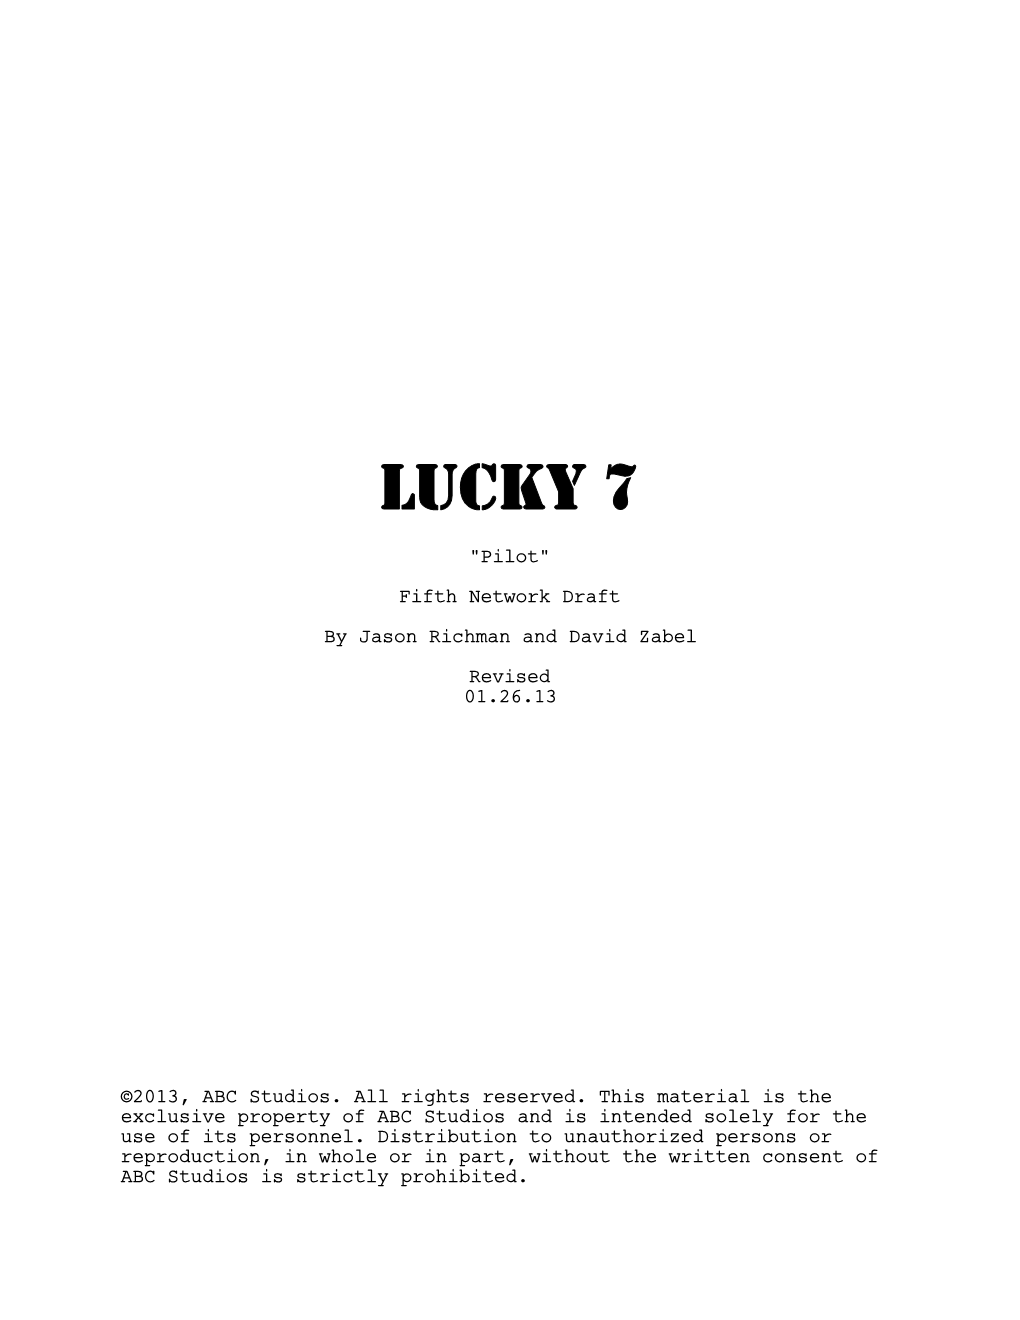 LUCKY 7 "Pilot" Fifth Network Draft by Jason Richman and David Zabel Revised 01.26.13